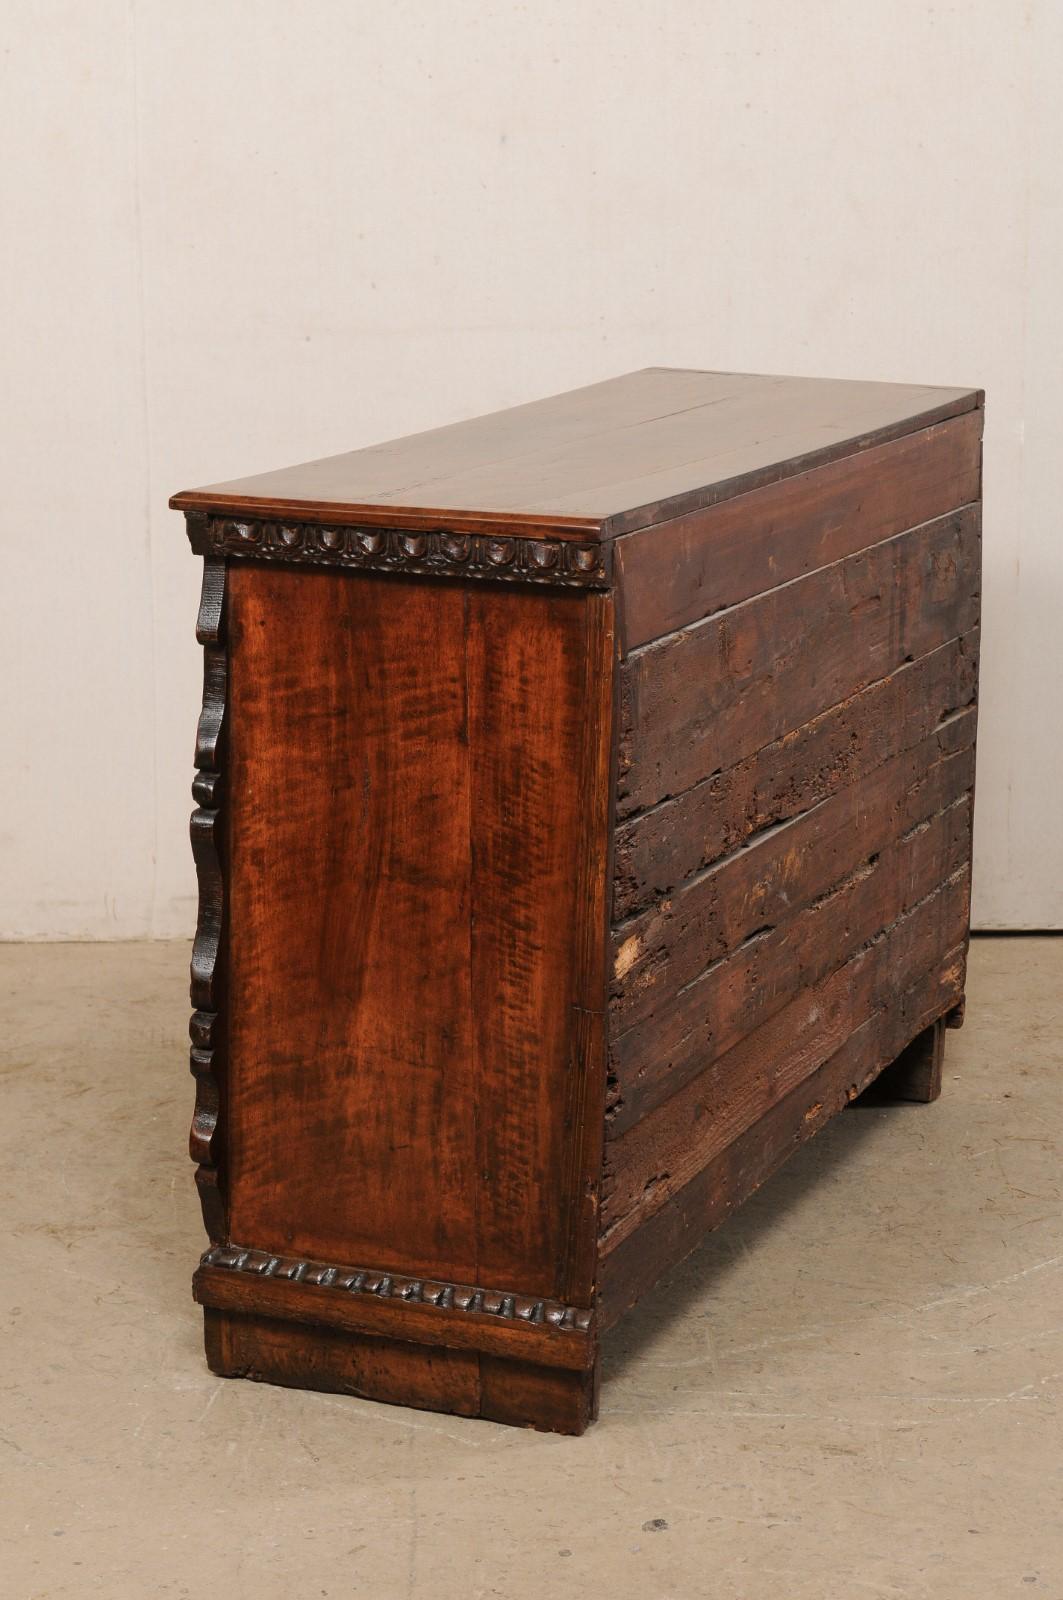 Early 18th C Italian Elaborately-Embellished Commode w/Putti Carved Drawer Pulls For Sale 7